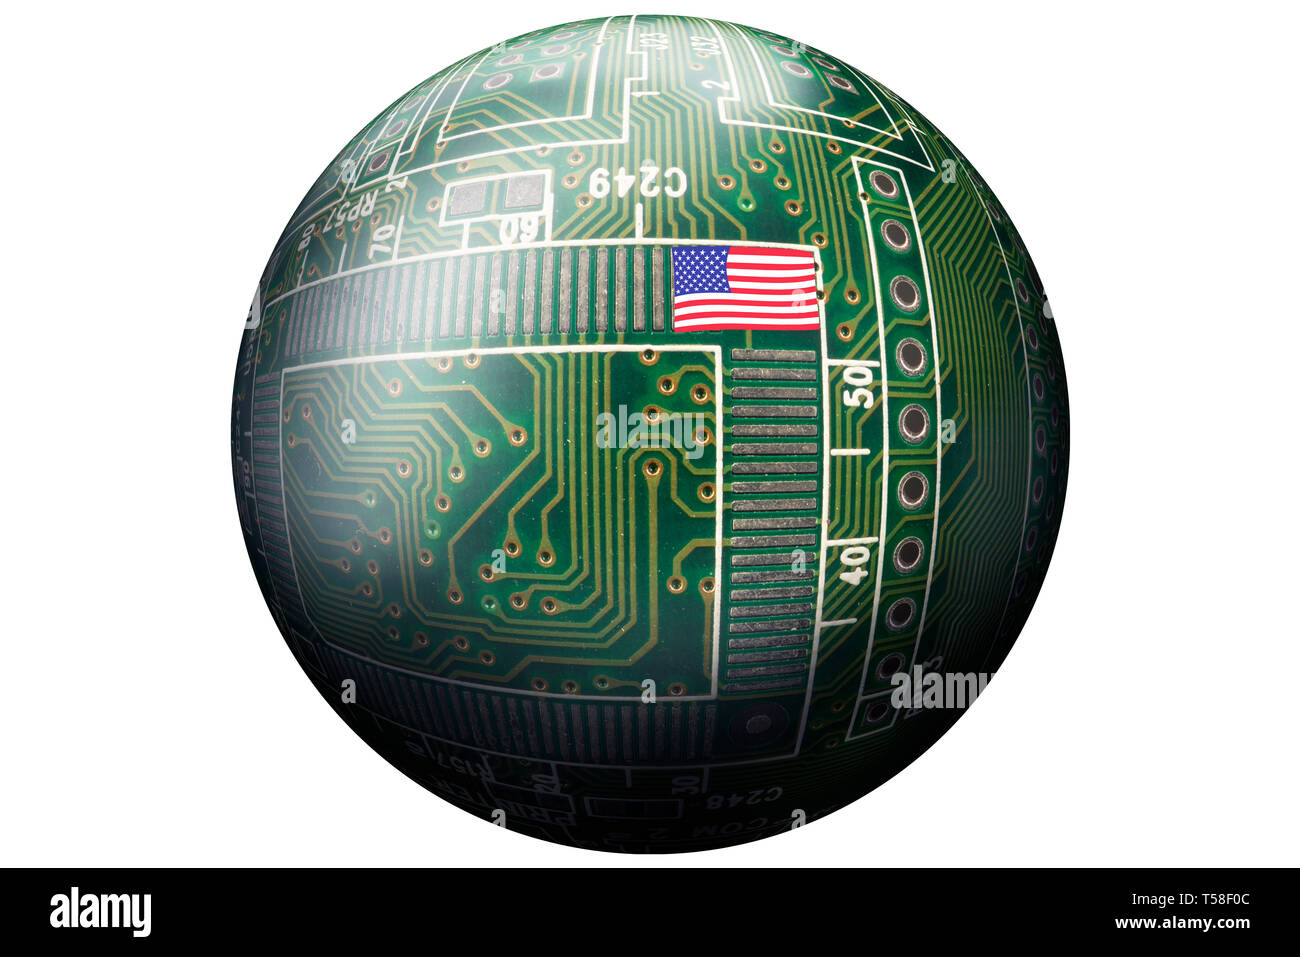 American high tech circuit ball with flag on it. Stock Photo